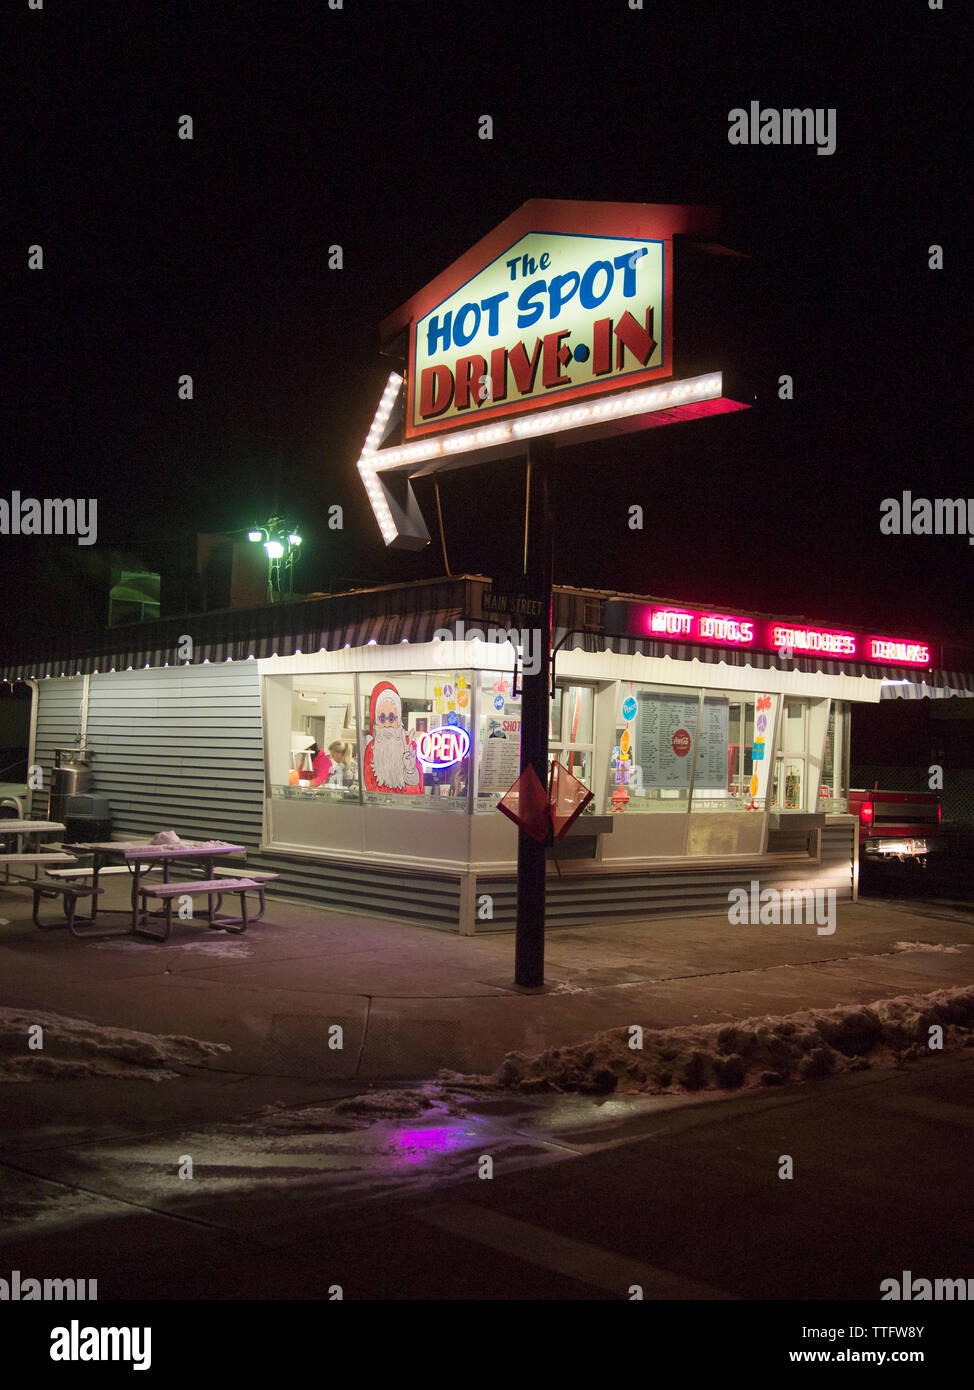 The Hot Spot Drive In. Stock Photo